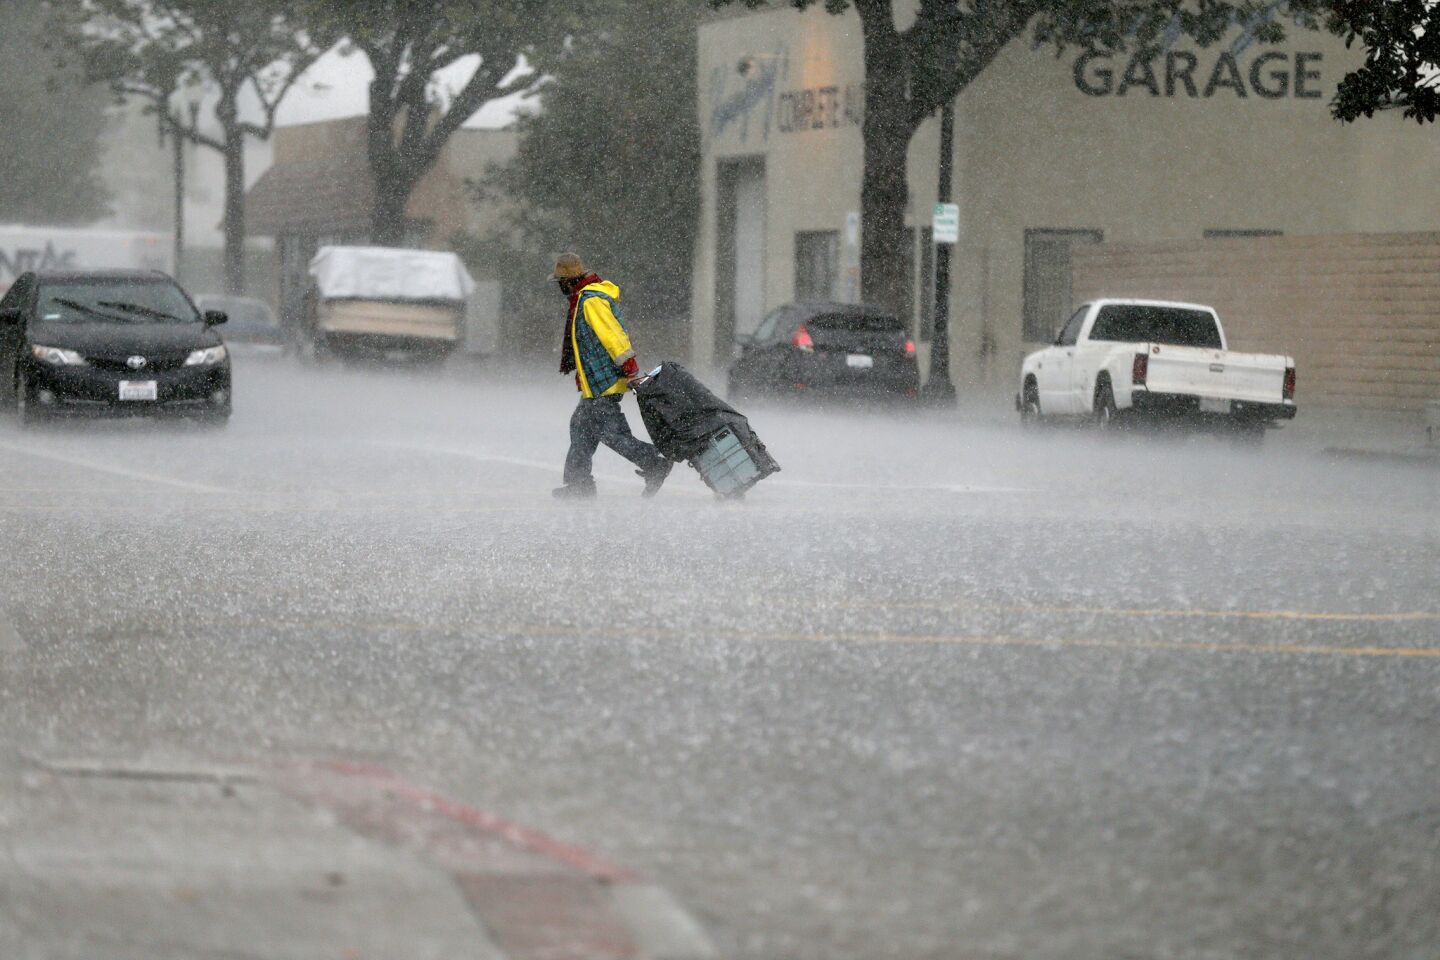 A man crossing the street gets caught in a heavy burst of rain on 4th Street in Santa Ana.